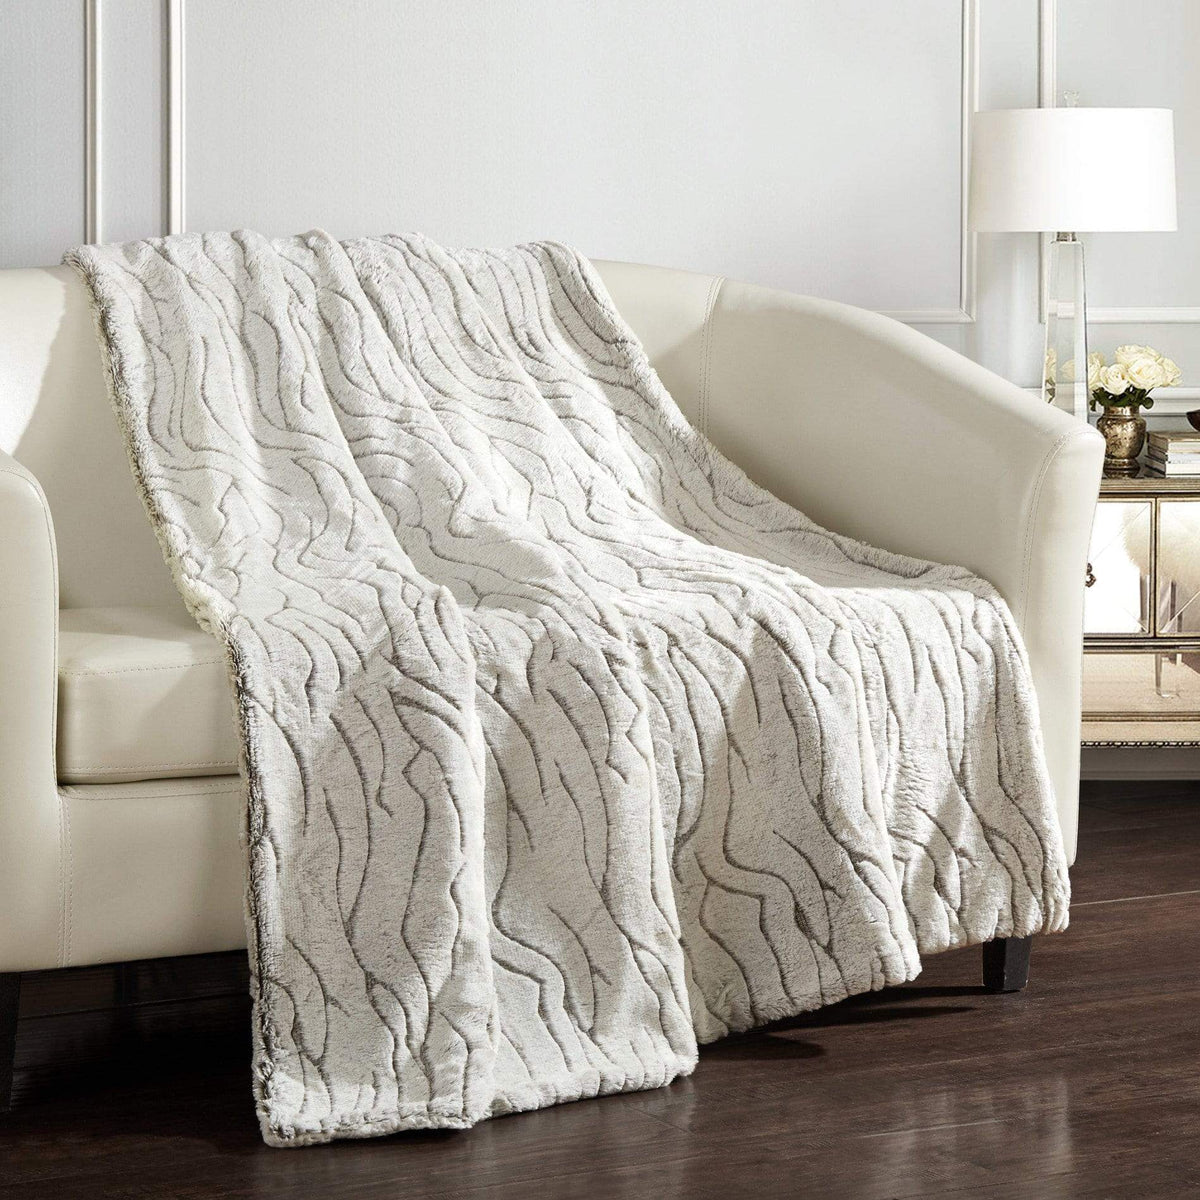 Chic Home Notingham Throw Blanket Cozy Super Soft Plush Decorative Animal Faux Fur Sherpa Lined 